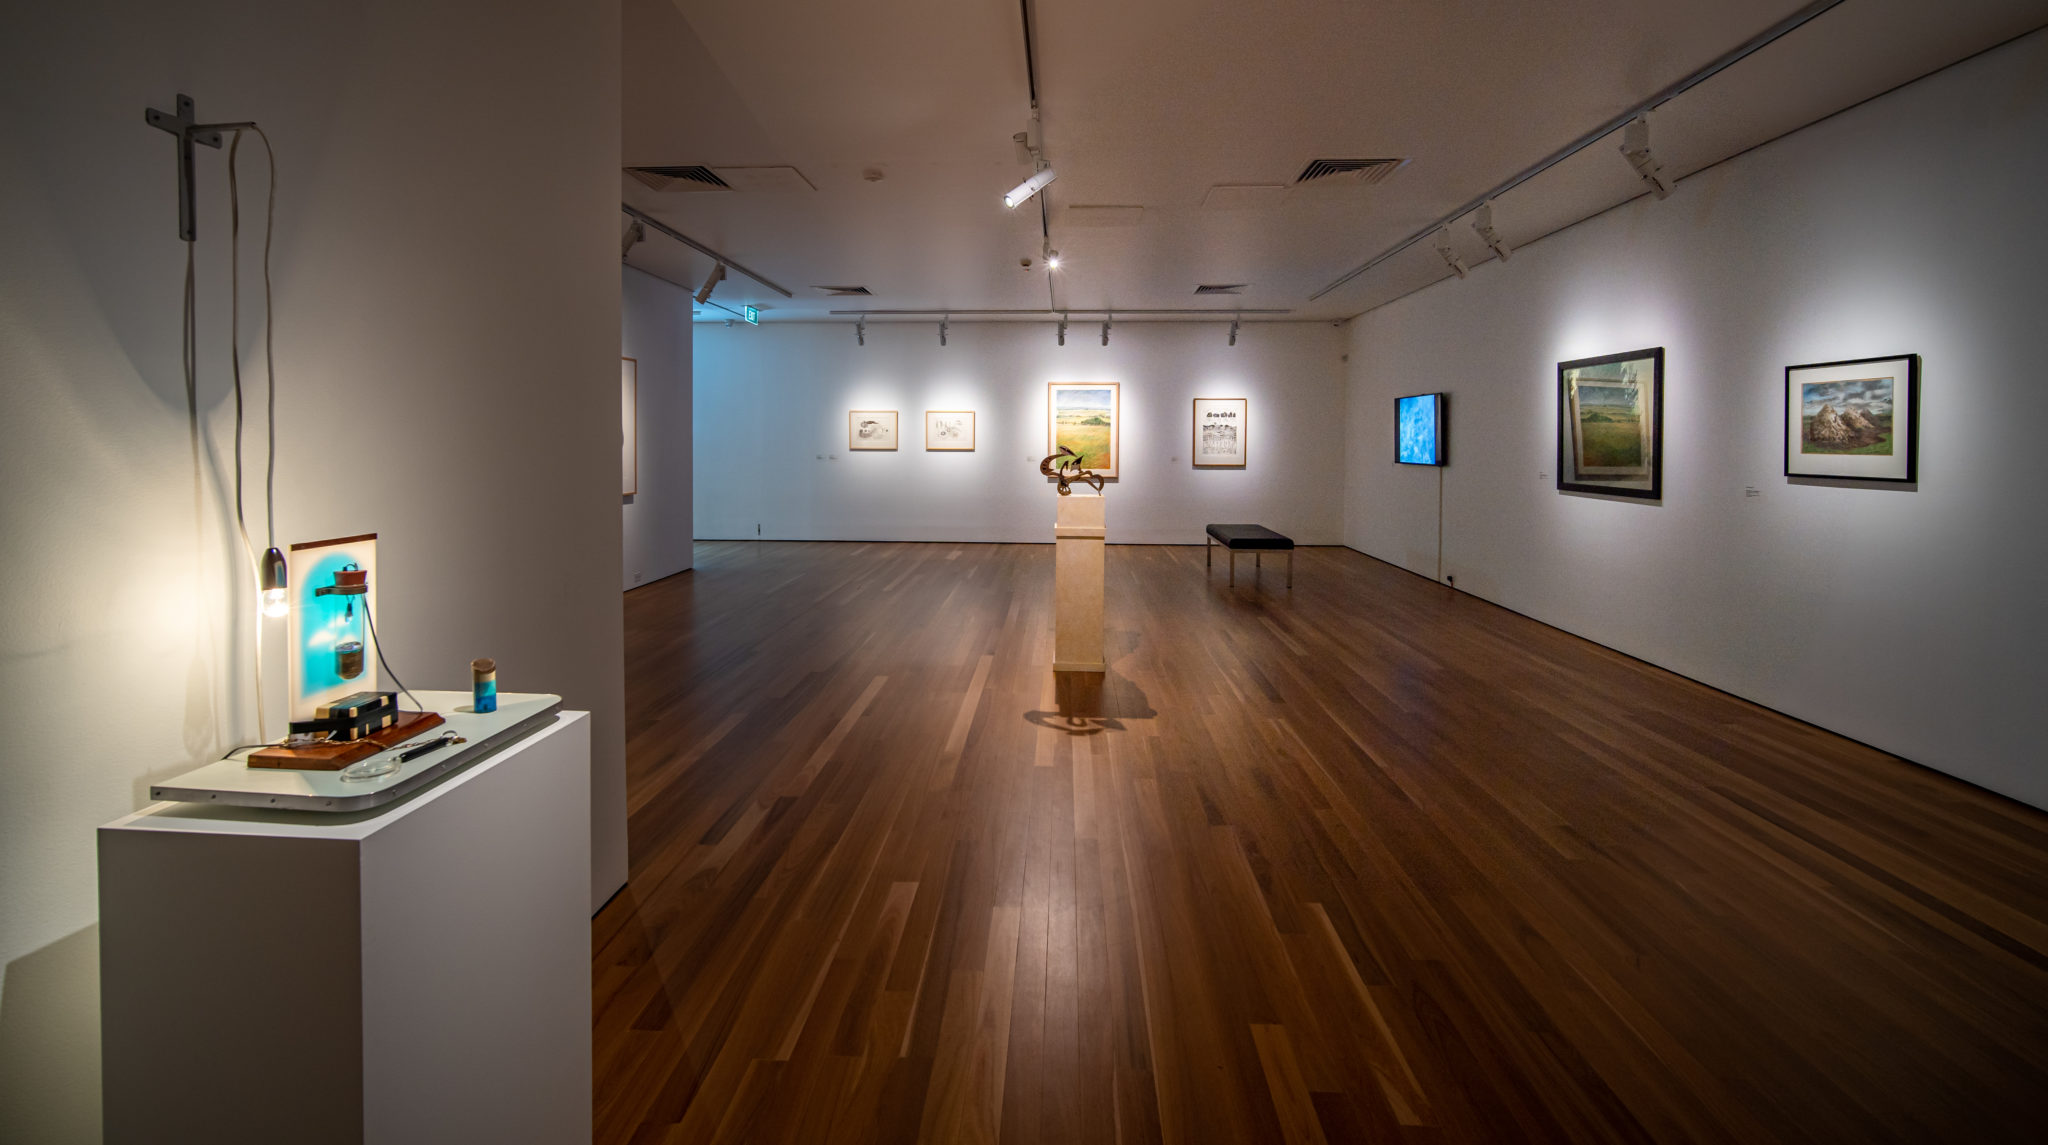 Exhibition documentation of 50 Years, 50 Artists, at Latrobe Regional Gallery, 2021.